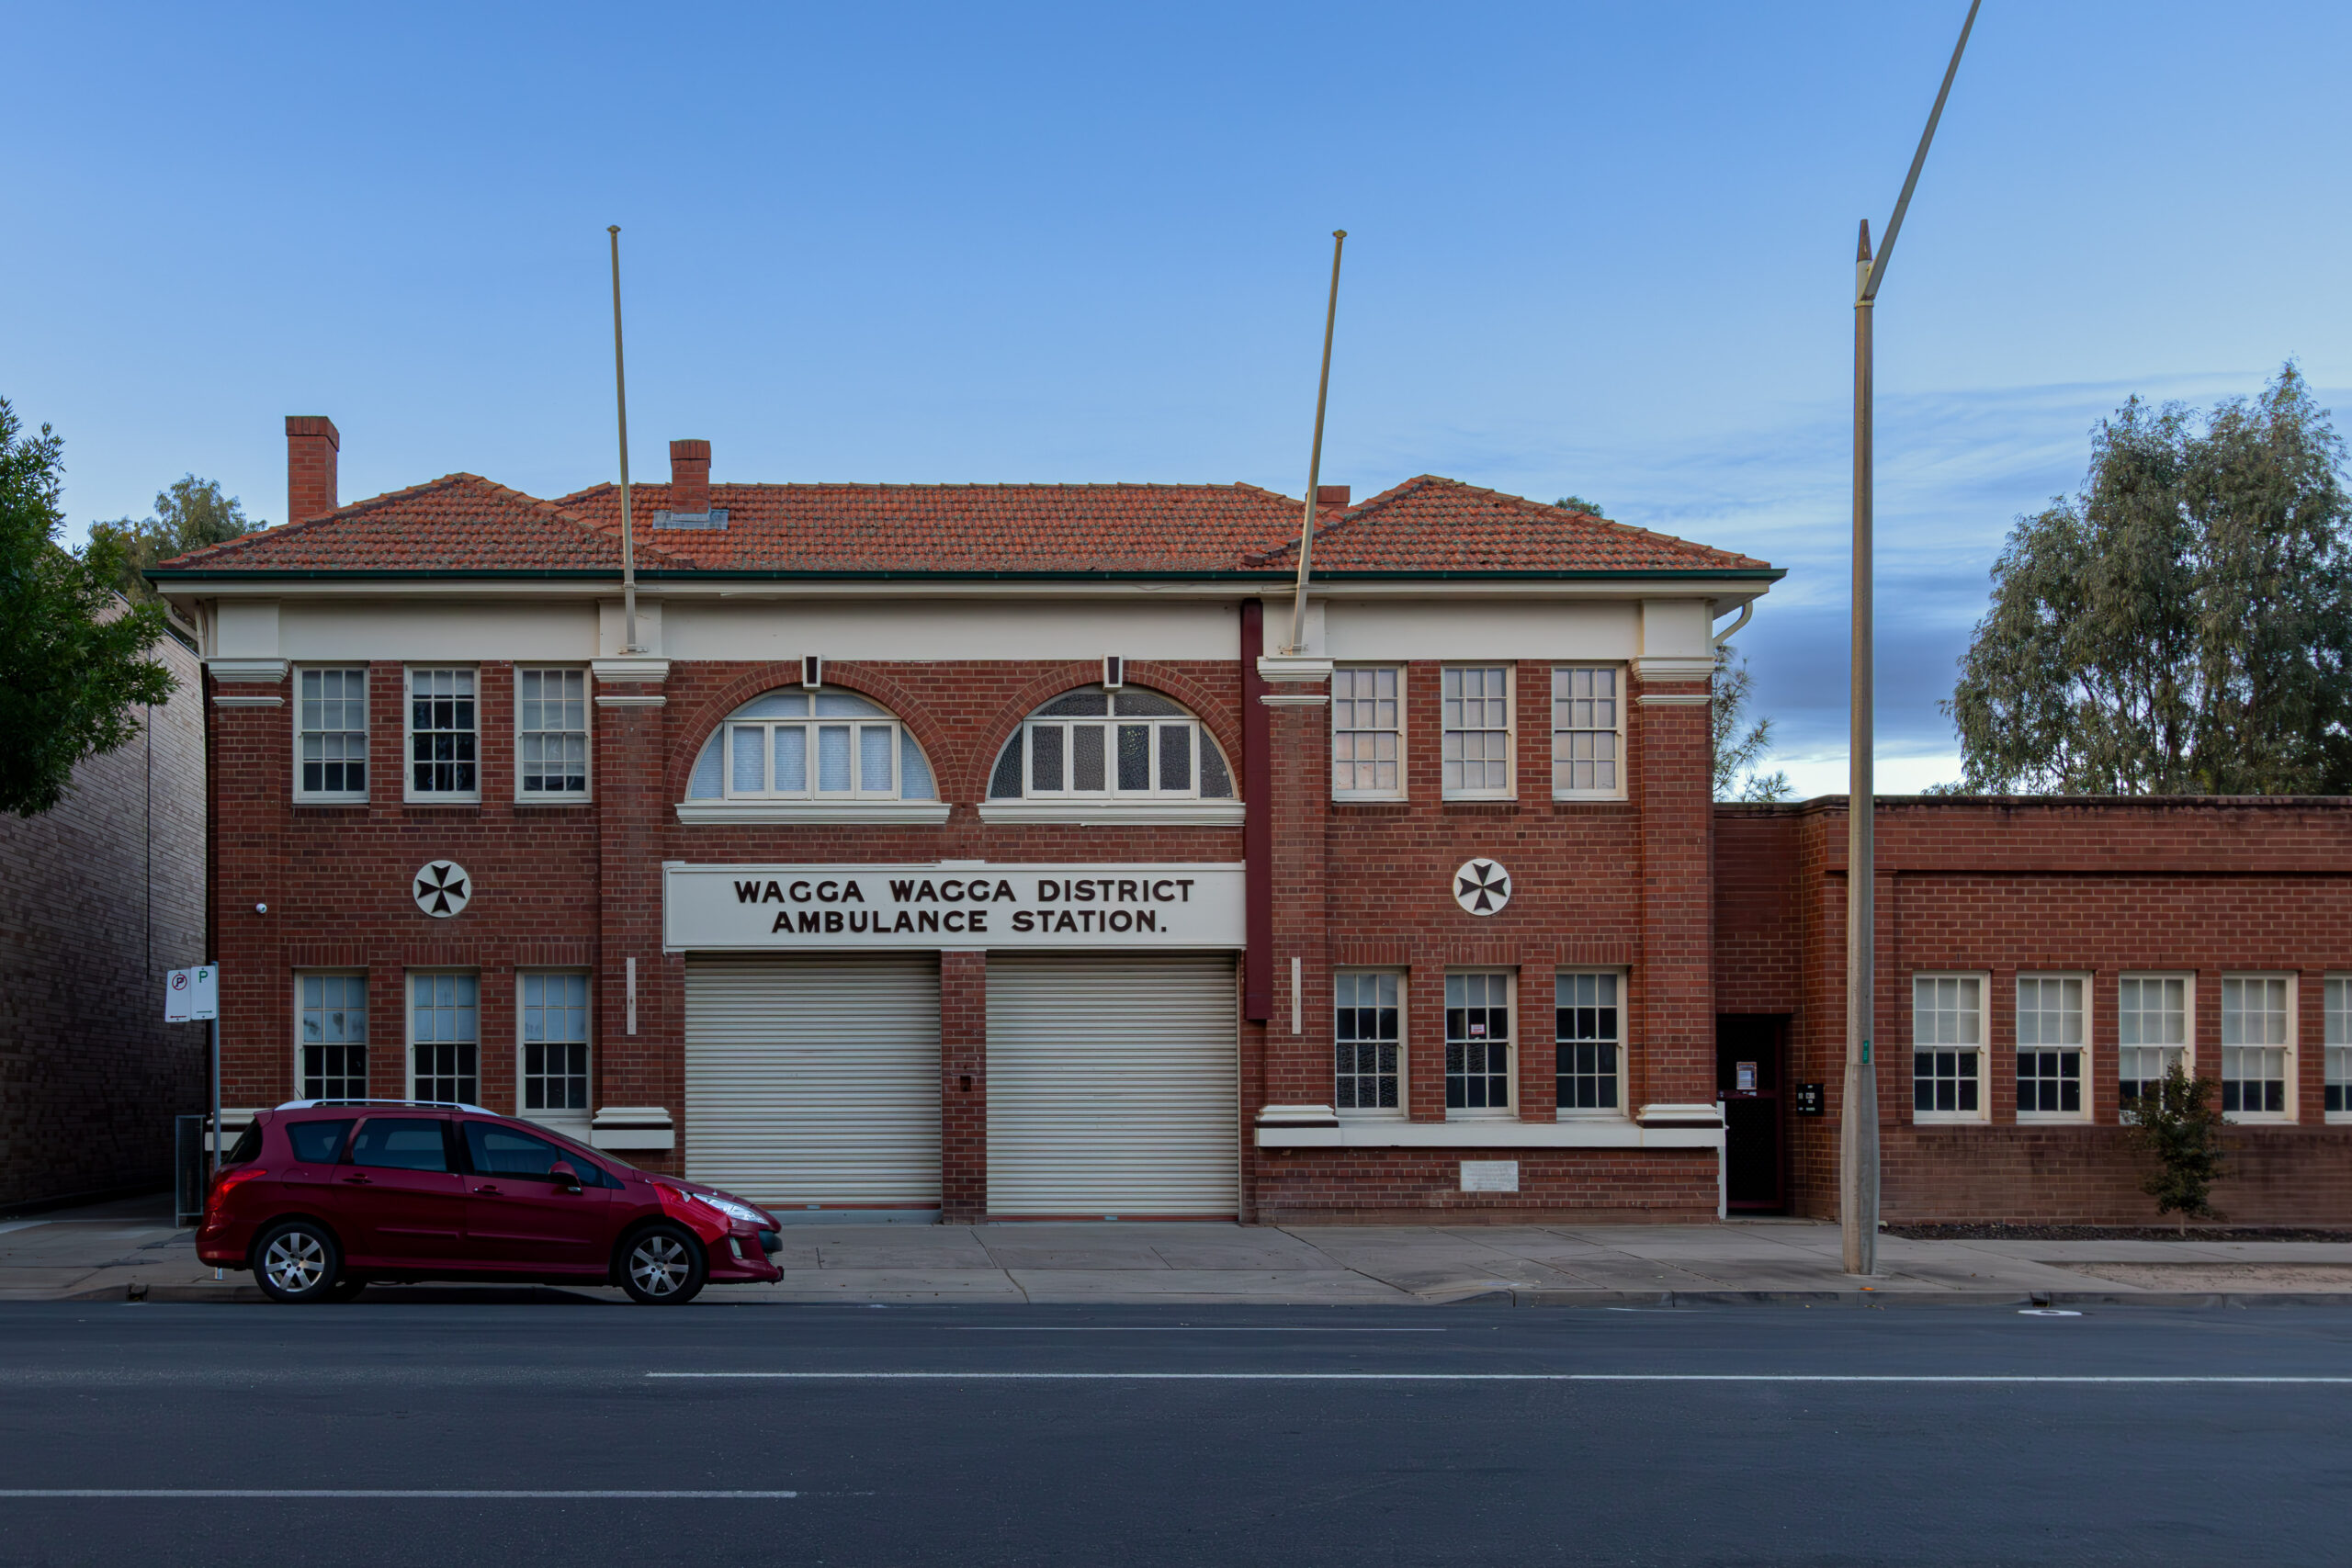 a 1920s red brick two-storey building with a red tile roof called Wagga Wagga District Ambulance Station